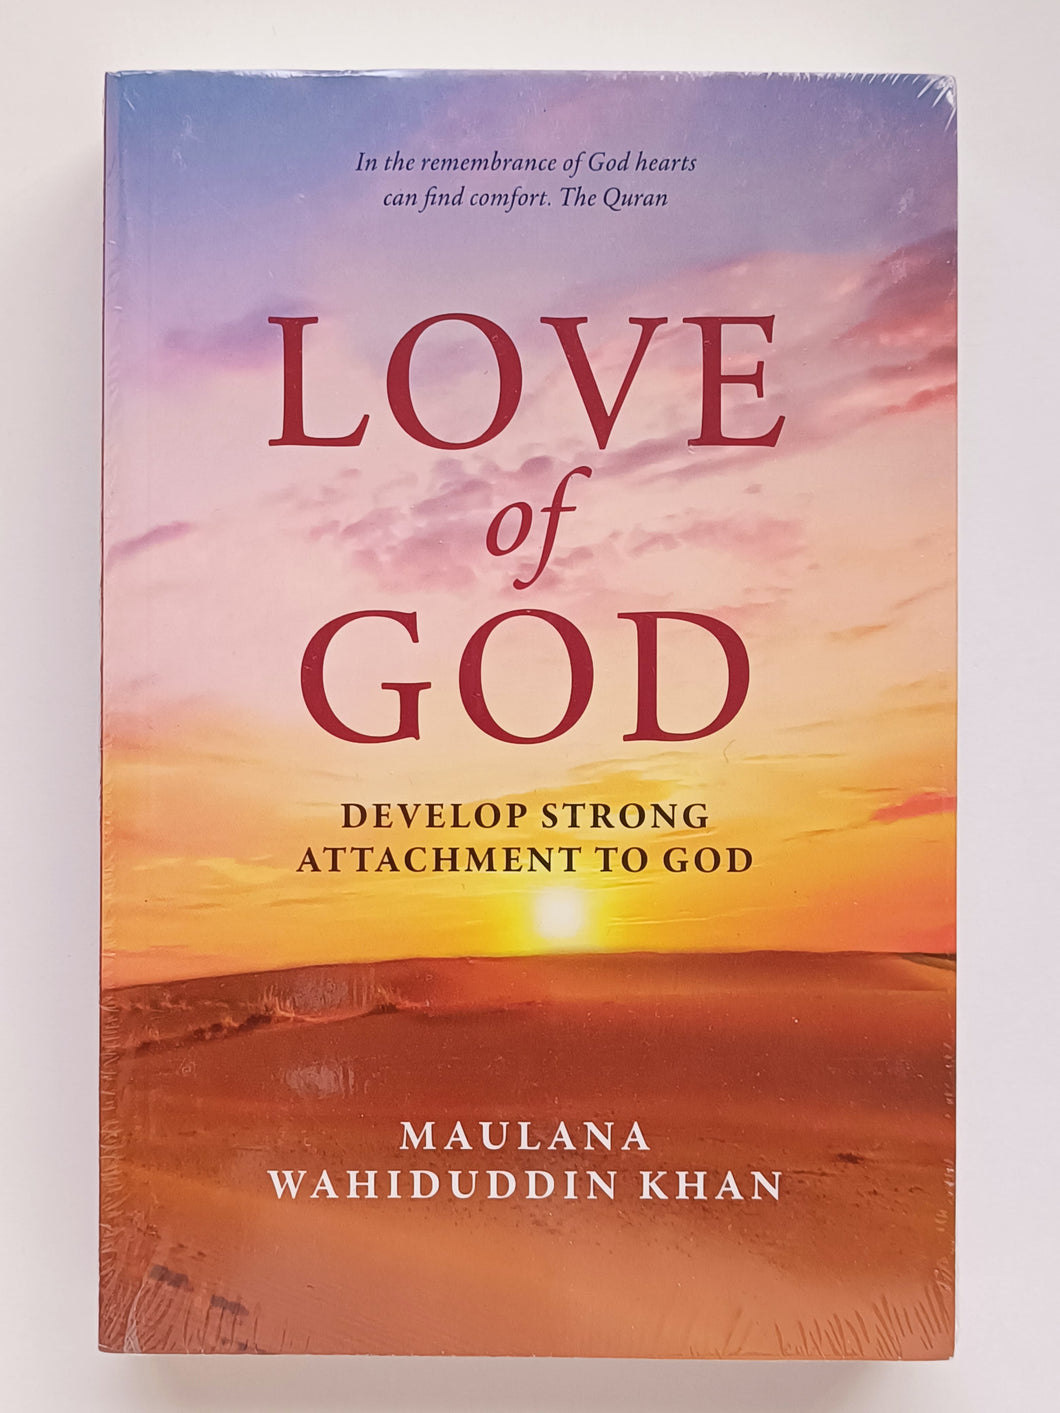 Love of God: Develop Strong Attachment to God